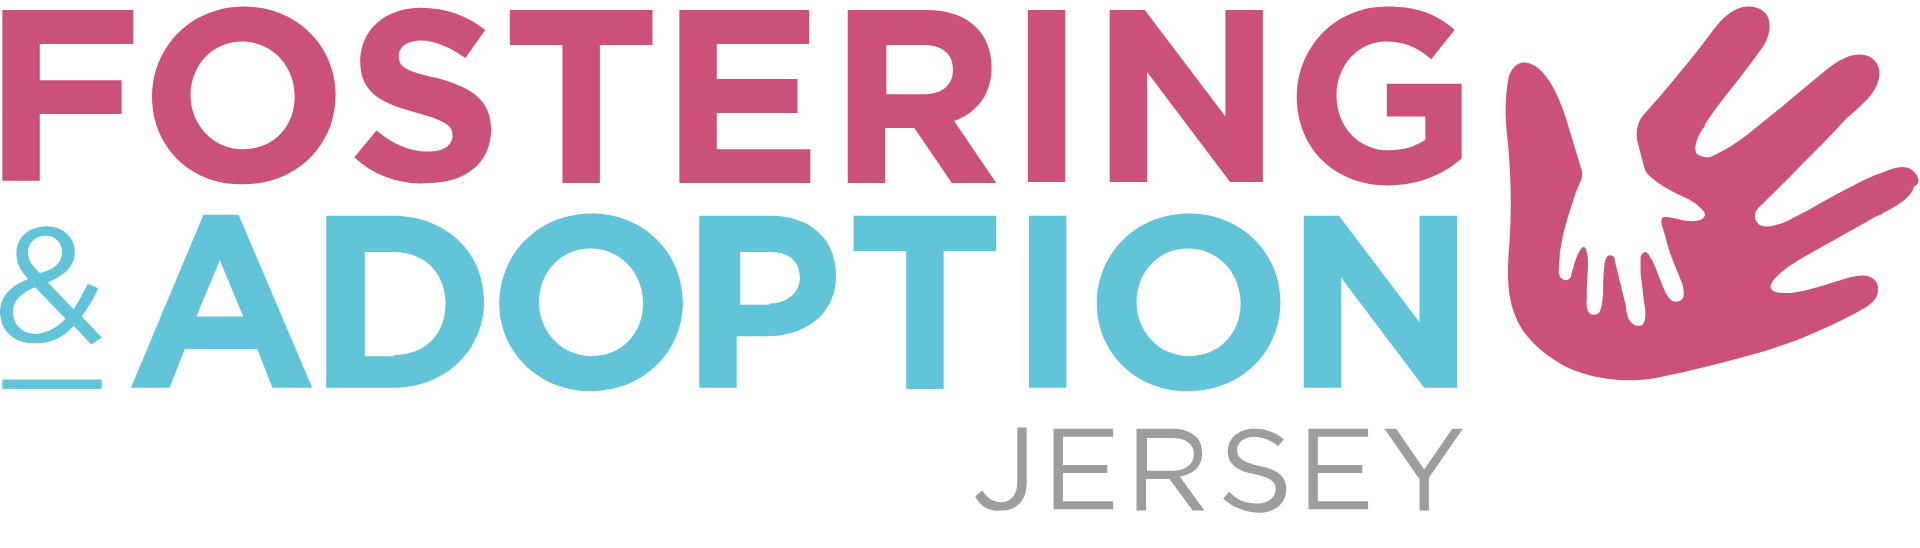 Fostering and Adoption Jersey logo